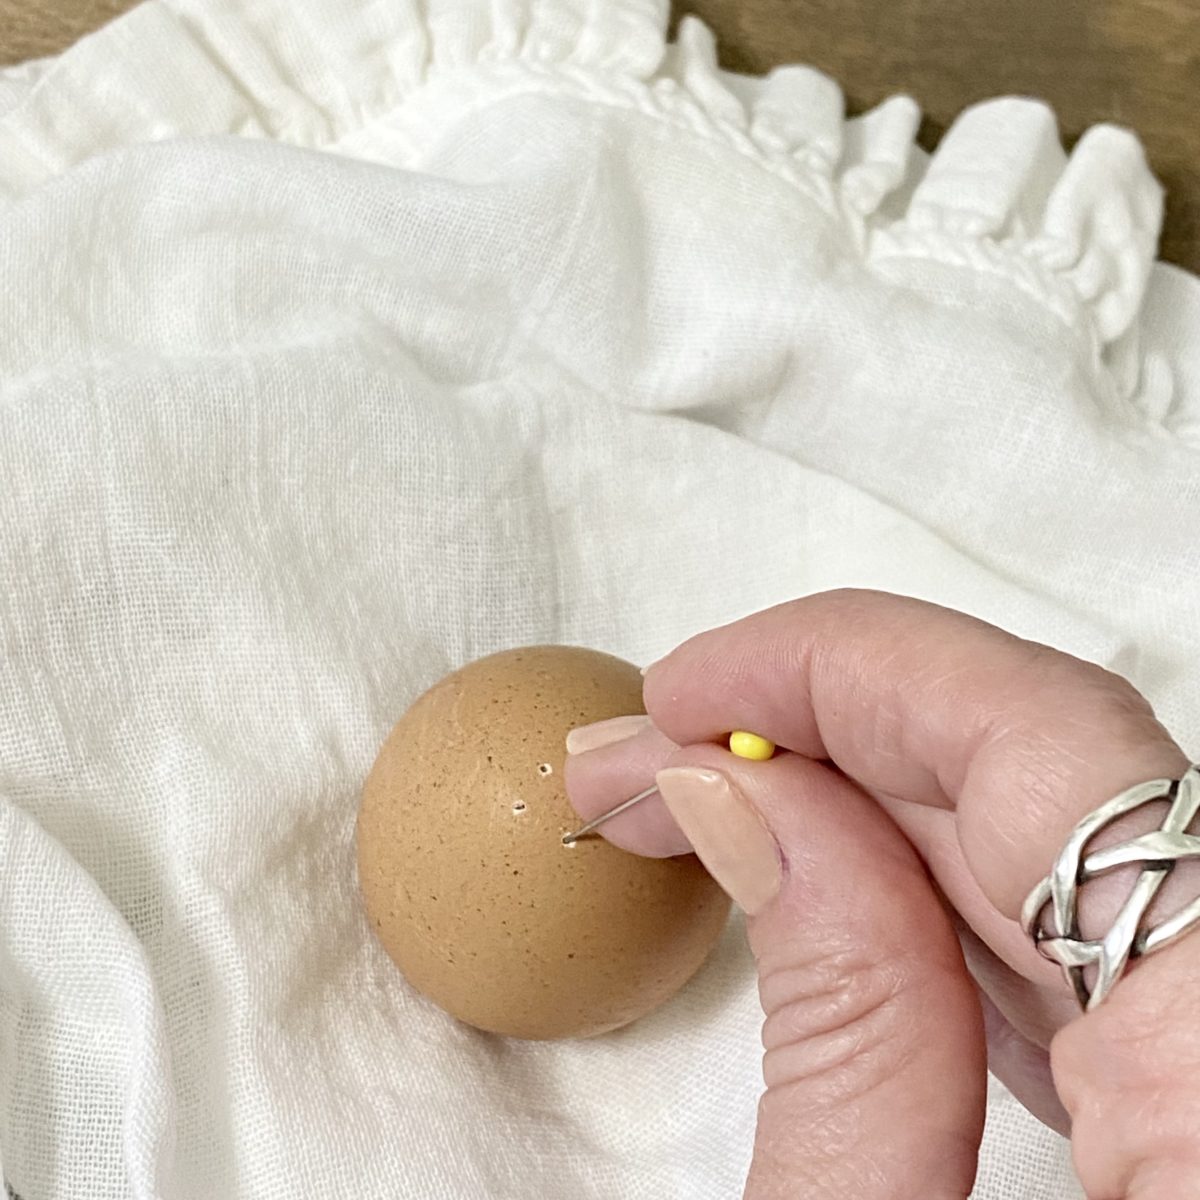 Using a straight pin to poke little holes in one side of a brown egg.